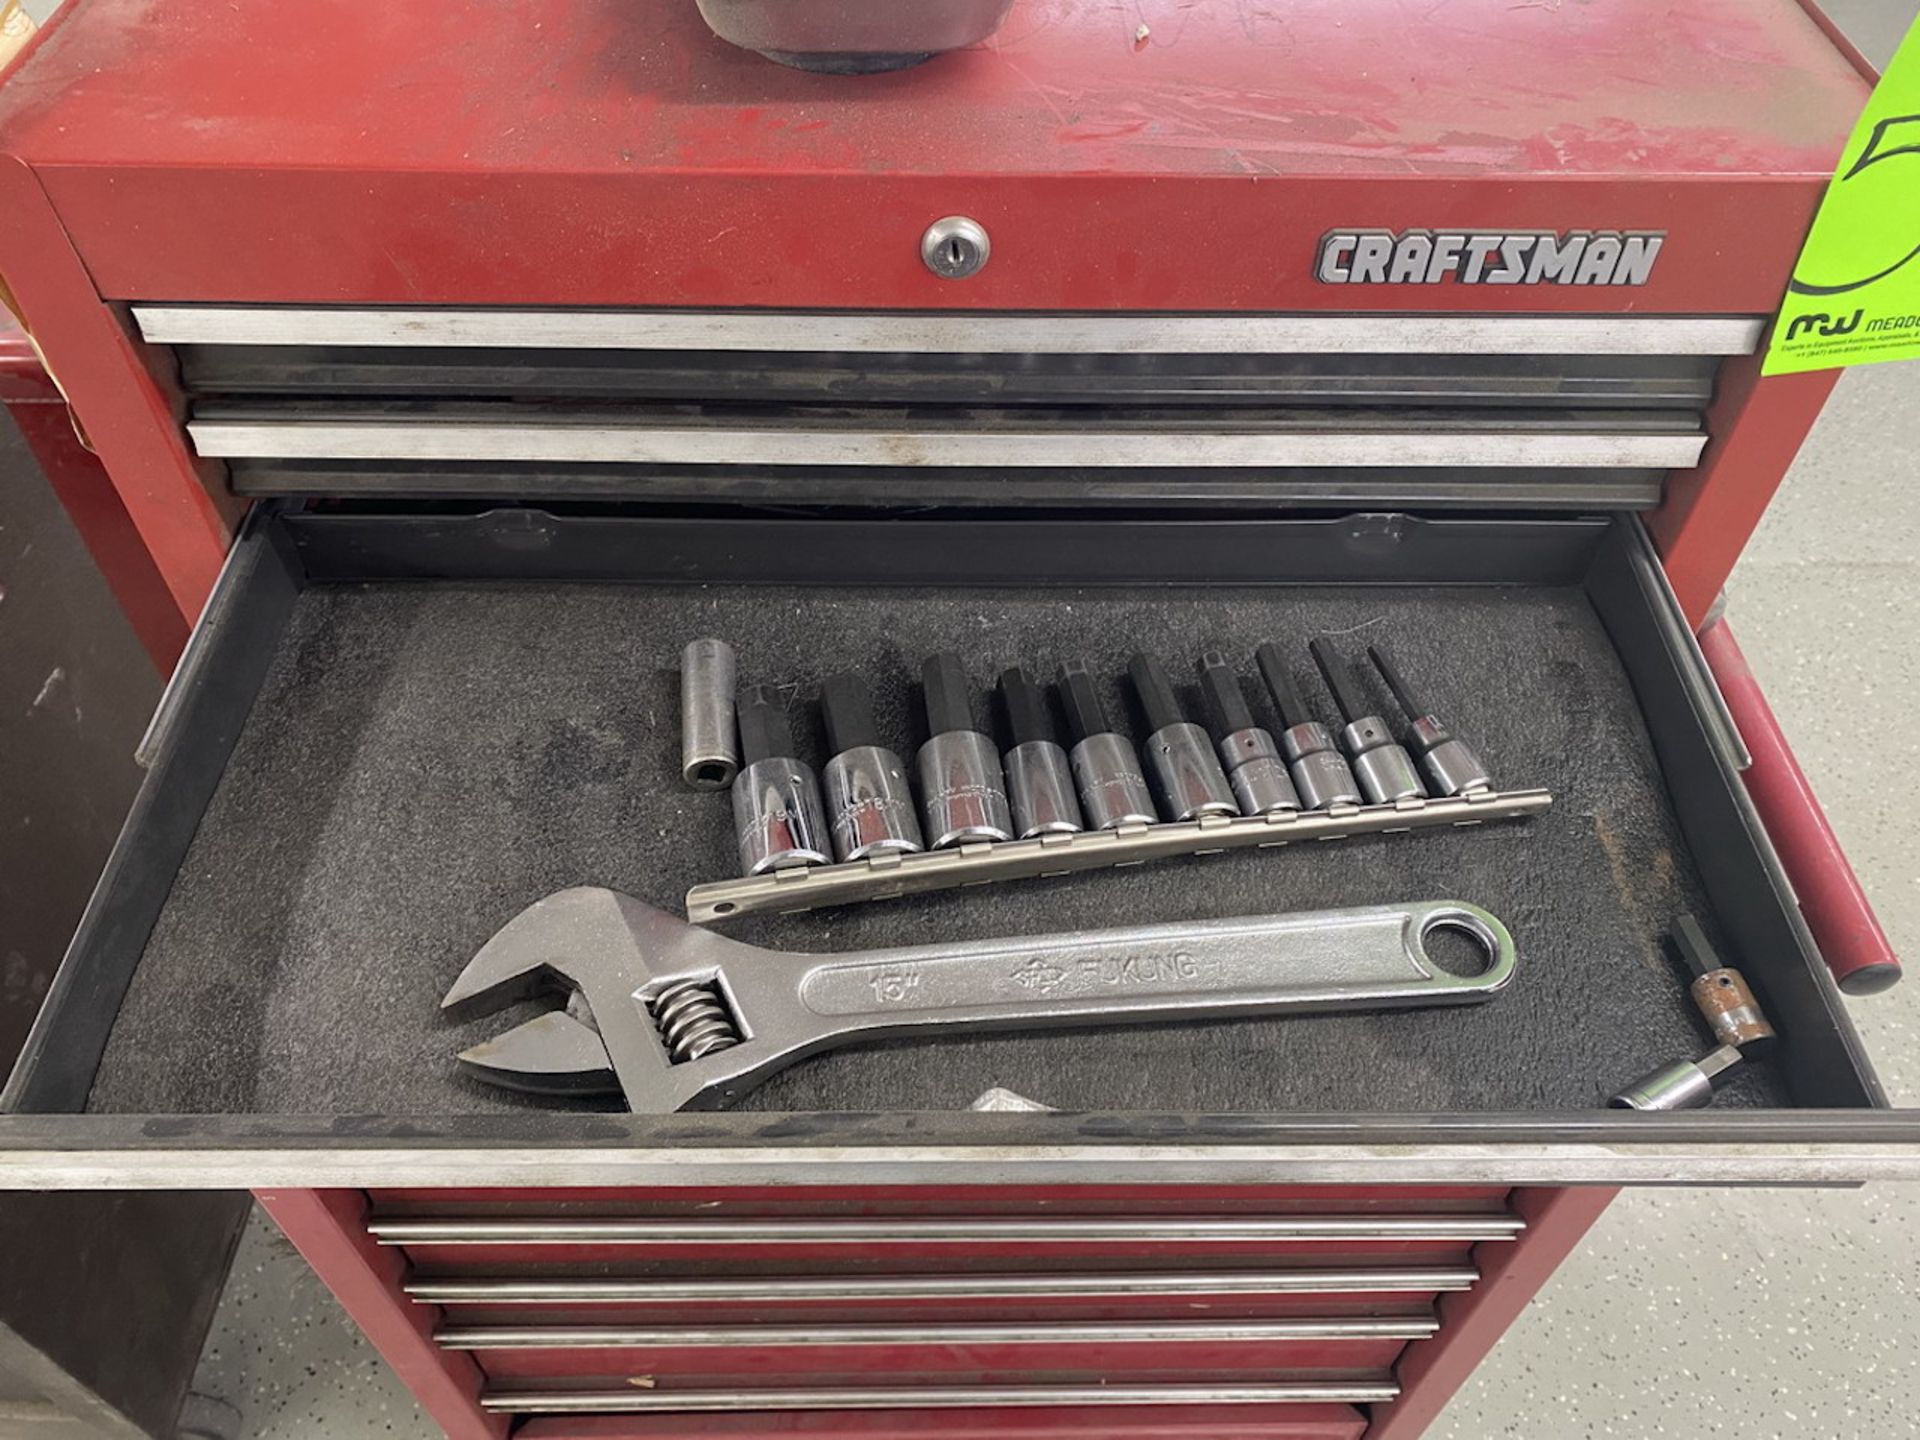 Craftsman 27" x 18" Tool Box with Contents incl. Screwdrivers, Rubber Hammers, and Wrenches - Image 5 of 11